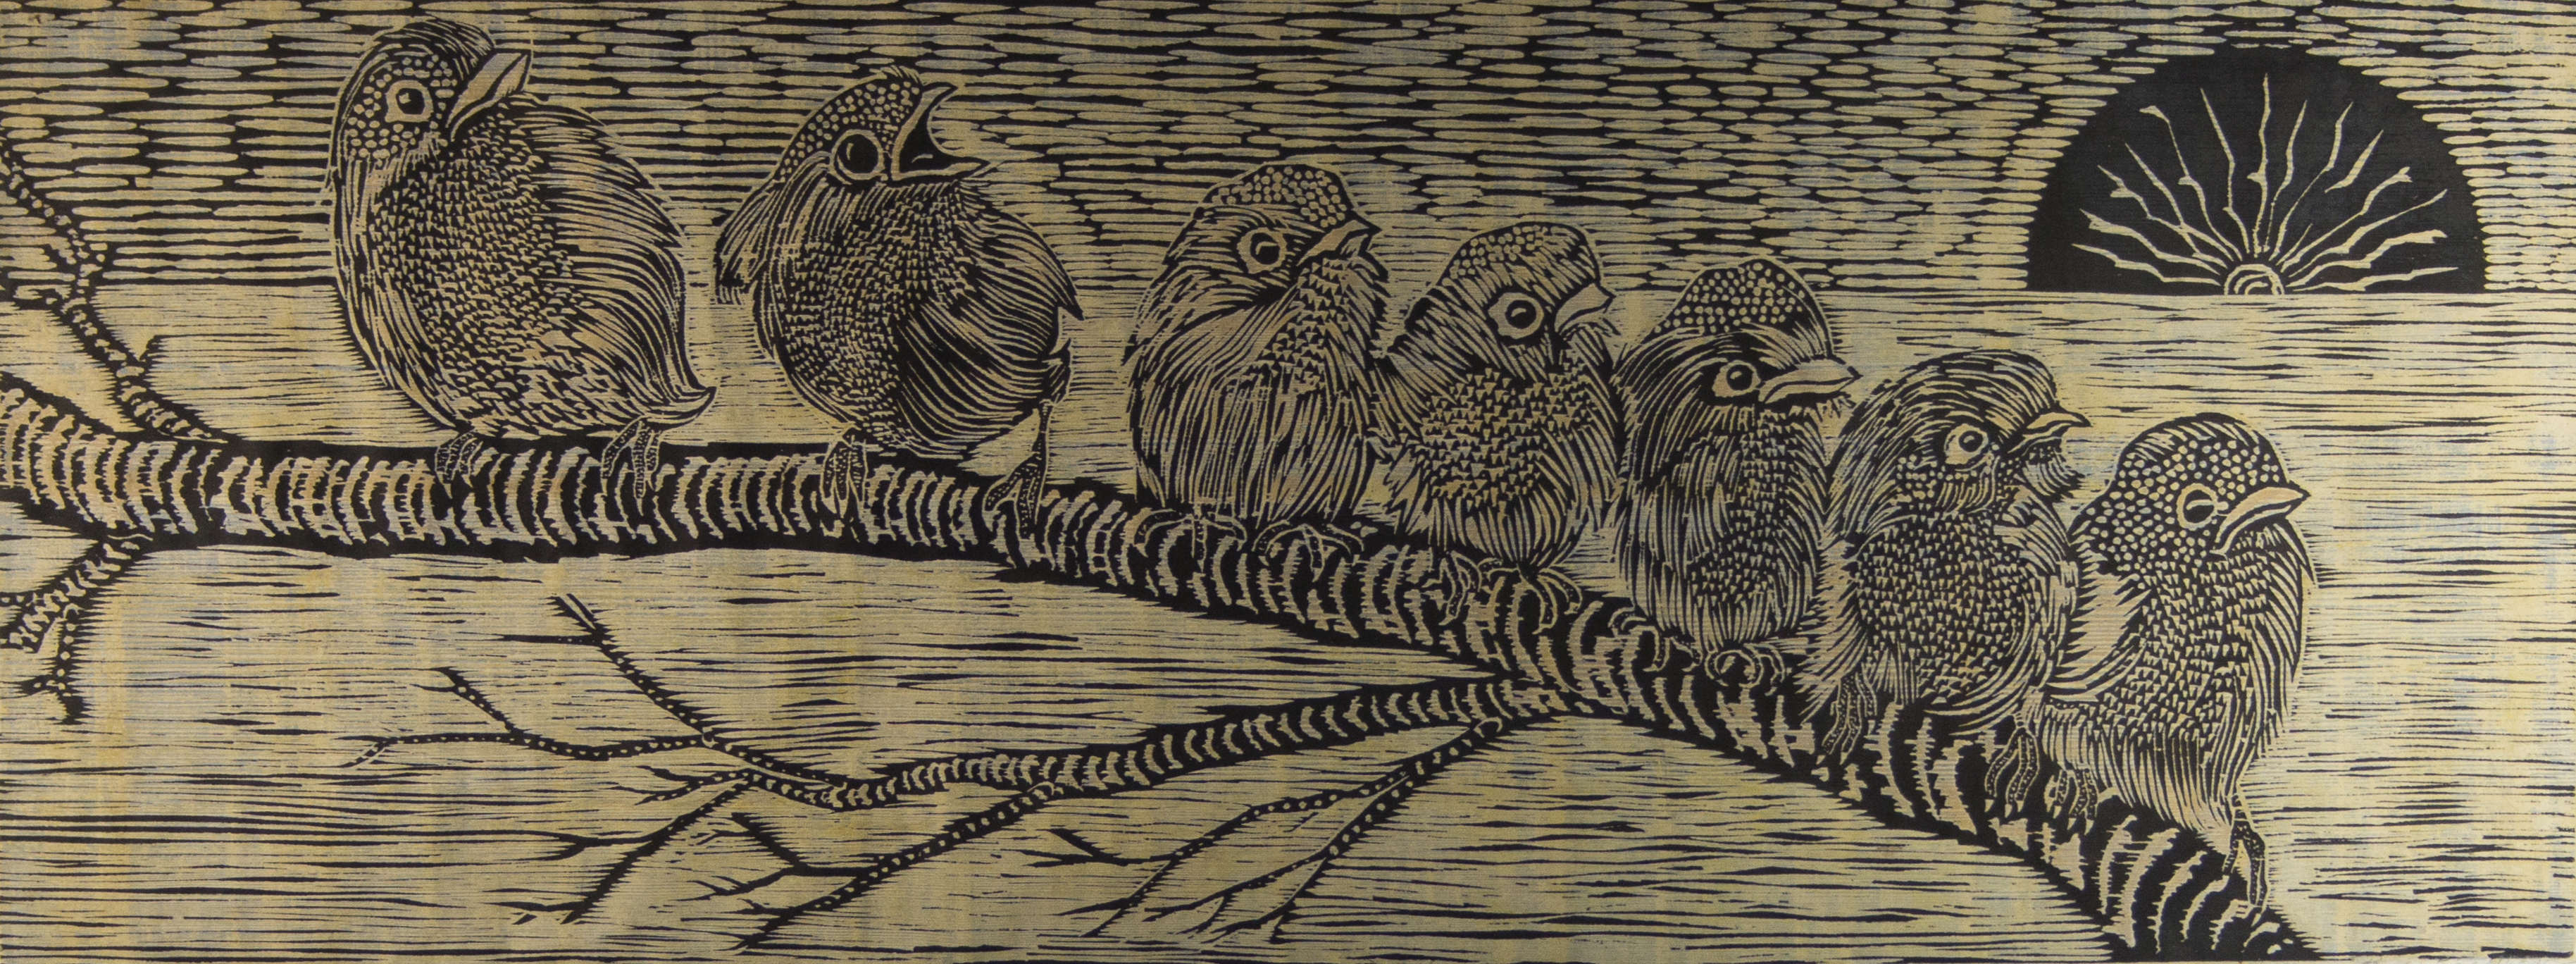 woodcut print of birds perched on a branch